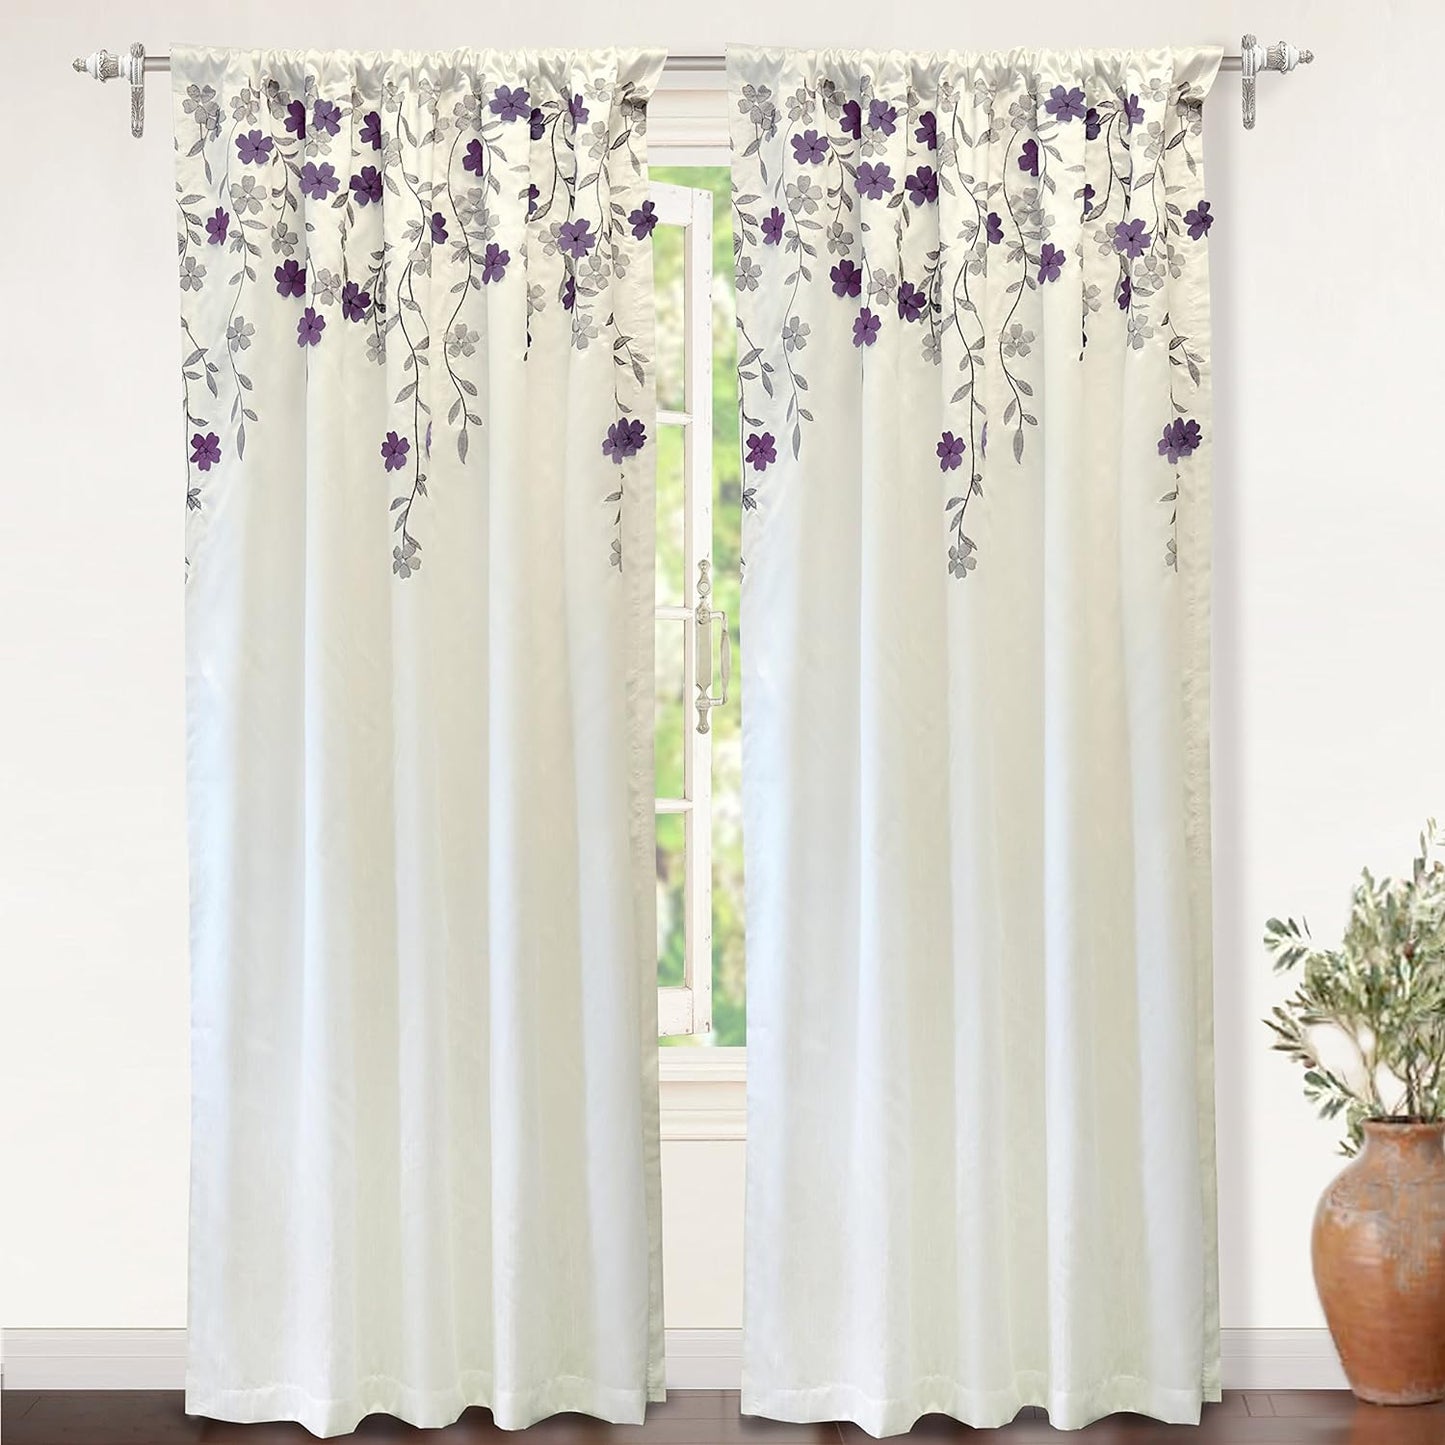 Driftaway Aubree Weeping Flower Print Thermal Room Darkening Privacy Window Curtain for Bedroom Living Room Rod Pocket 2 Panels 52 Inch by 84 Inch Blue  DriftAway One Panel Ivory Purple 50"X96" 